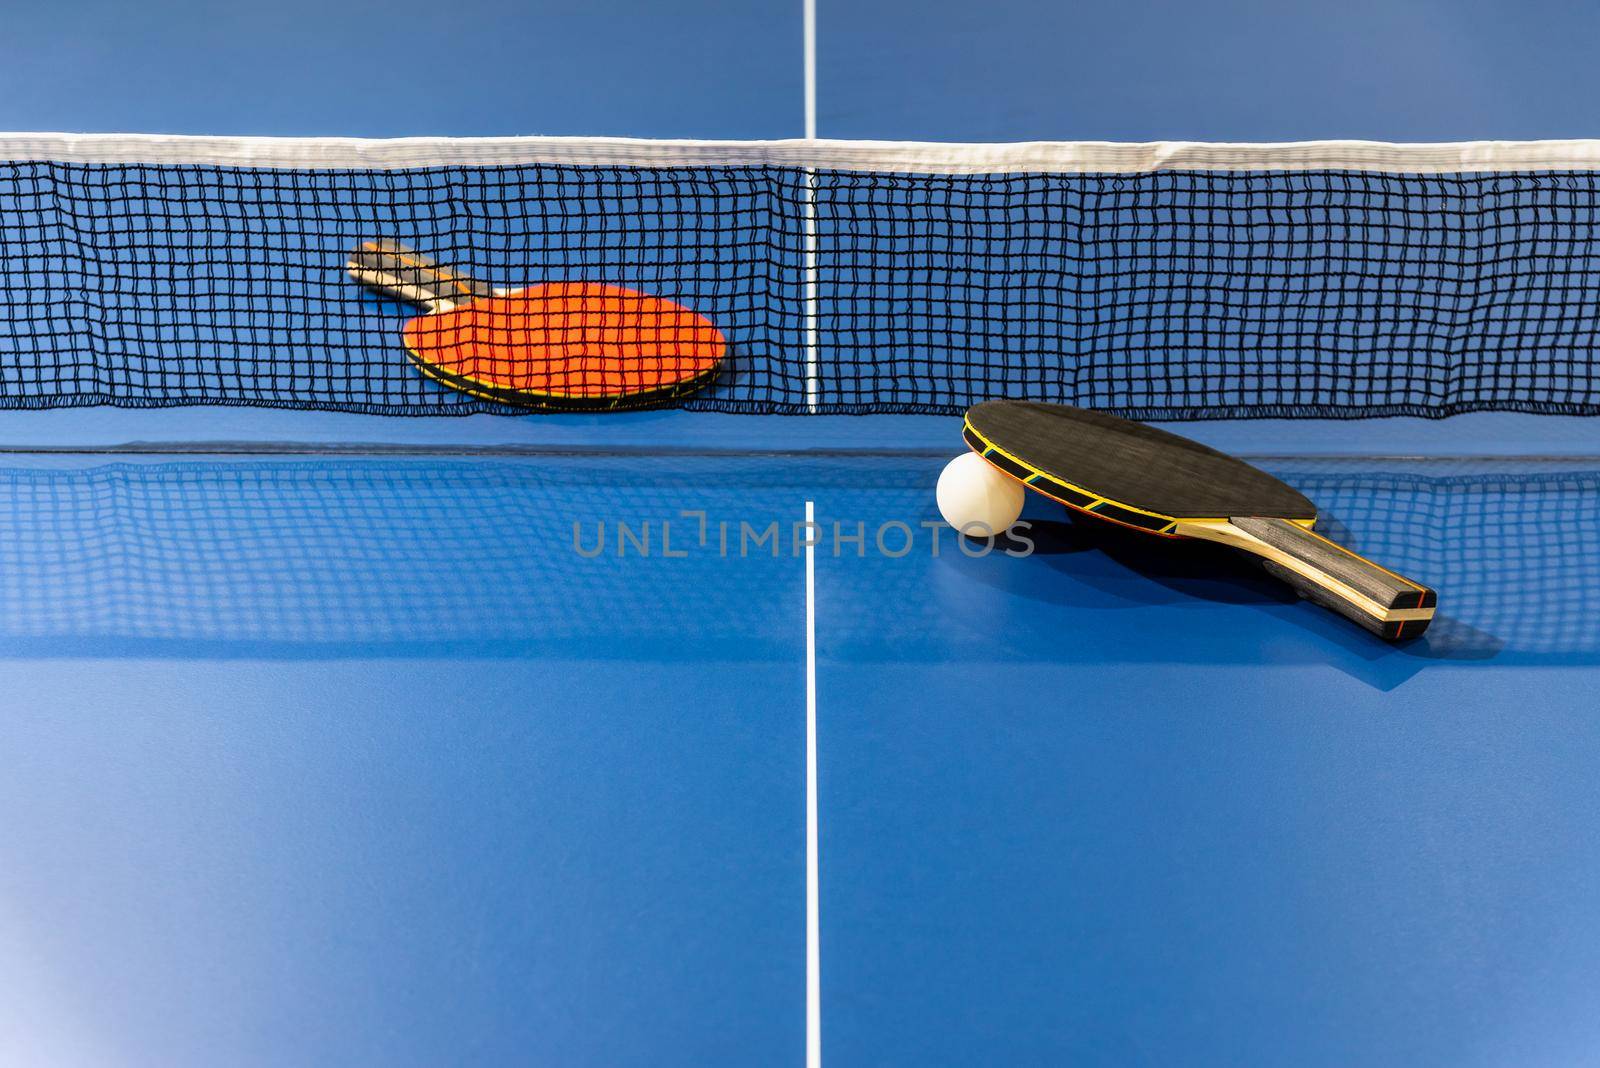 Black and red table tennis racket and a white ball on the blue ping pong table with a net, Two table tennis paddle is a sports competition equipment indoor activity and exercise for background concept